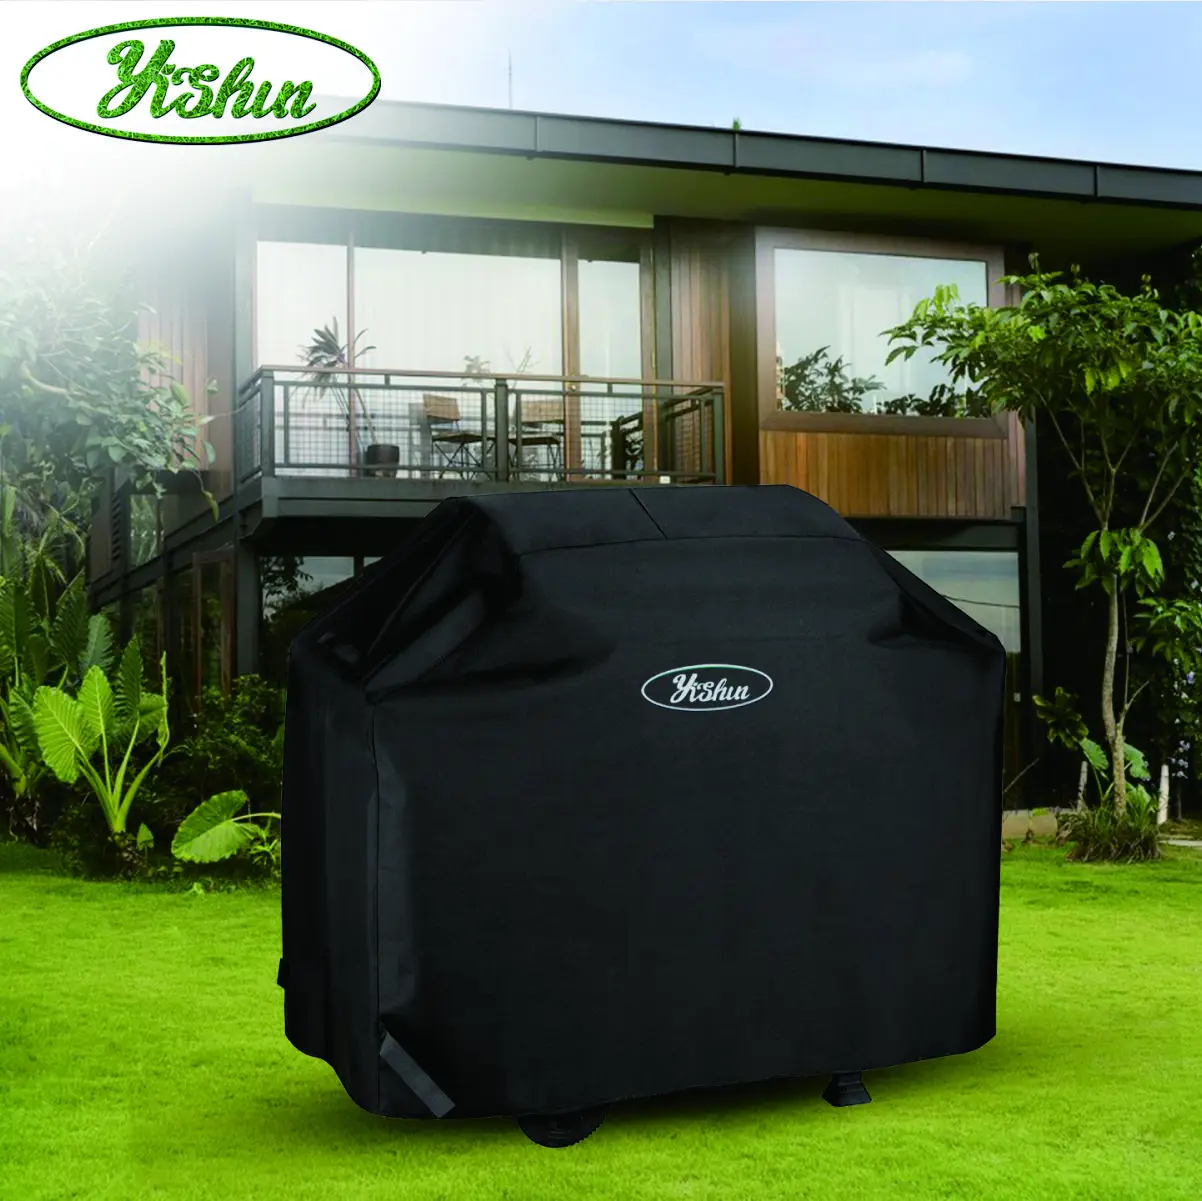 Waterproof Barbecue Cover Anti Dust Rain Cover Garden Cover Protector K4H3 H0H2 